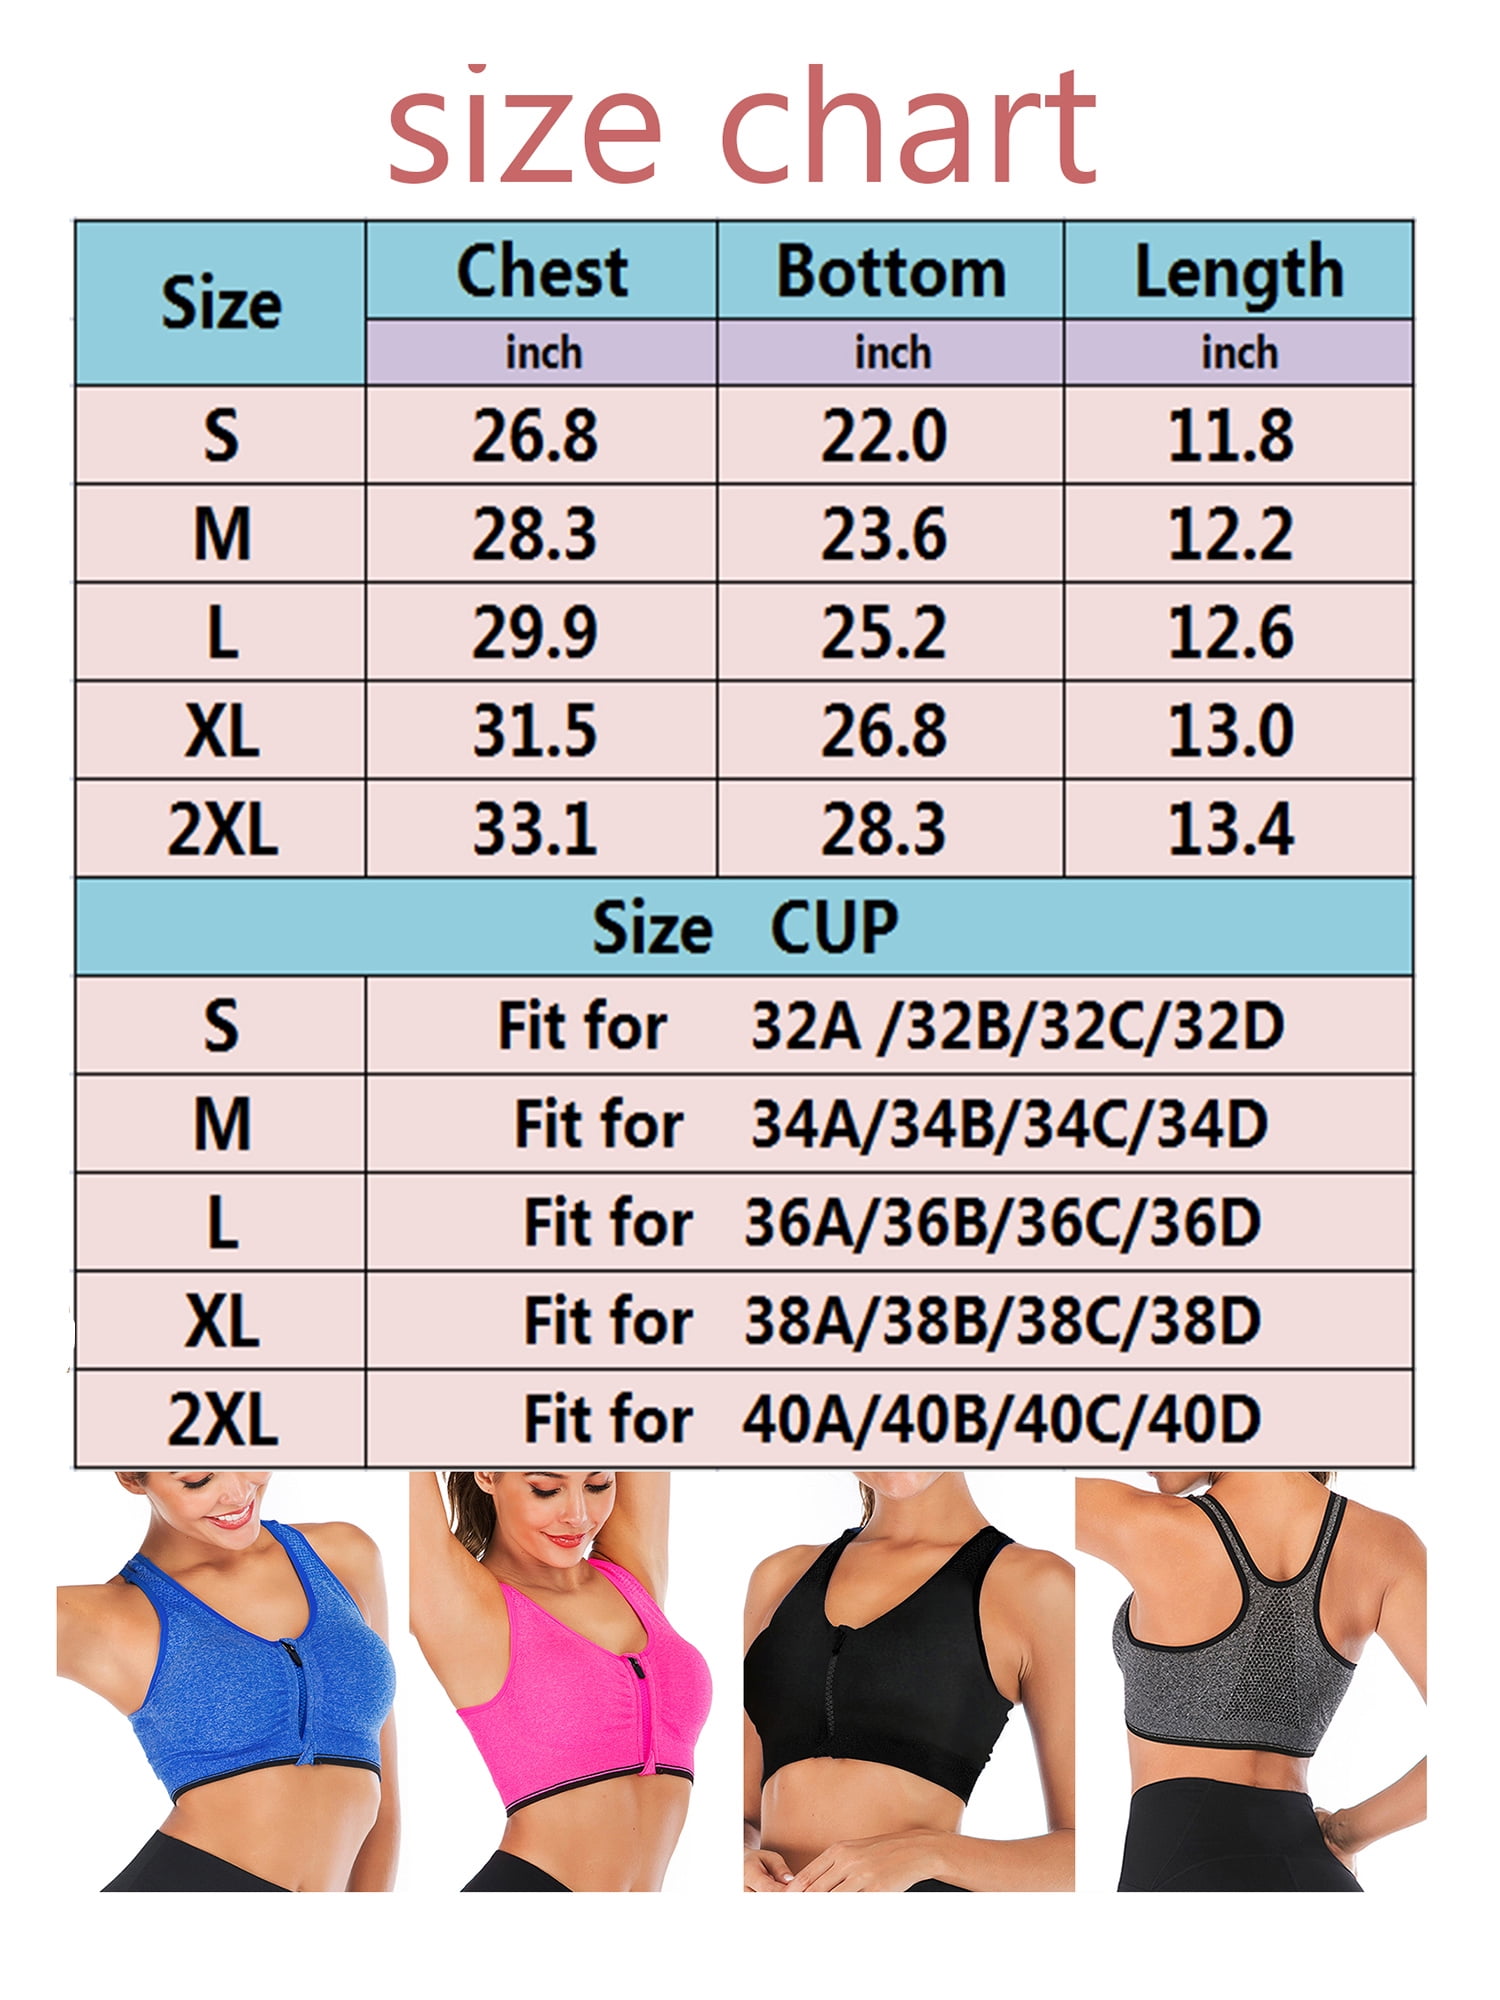 NCTCITY Women's Sports Bra High Impact Support Bras Front Zip